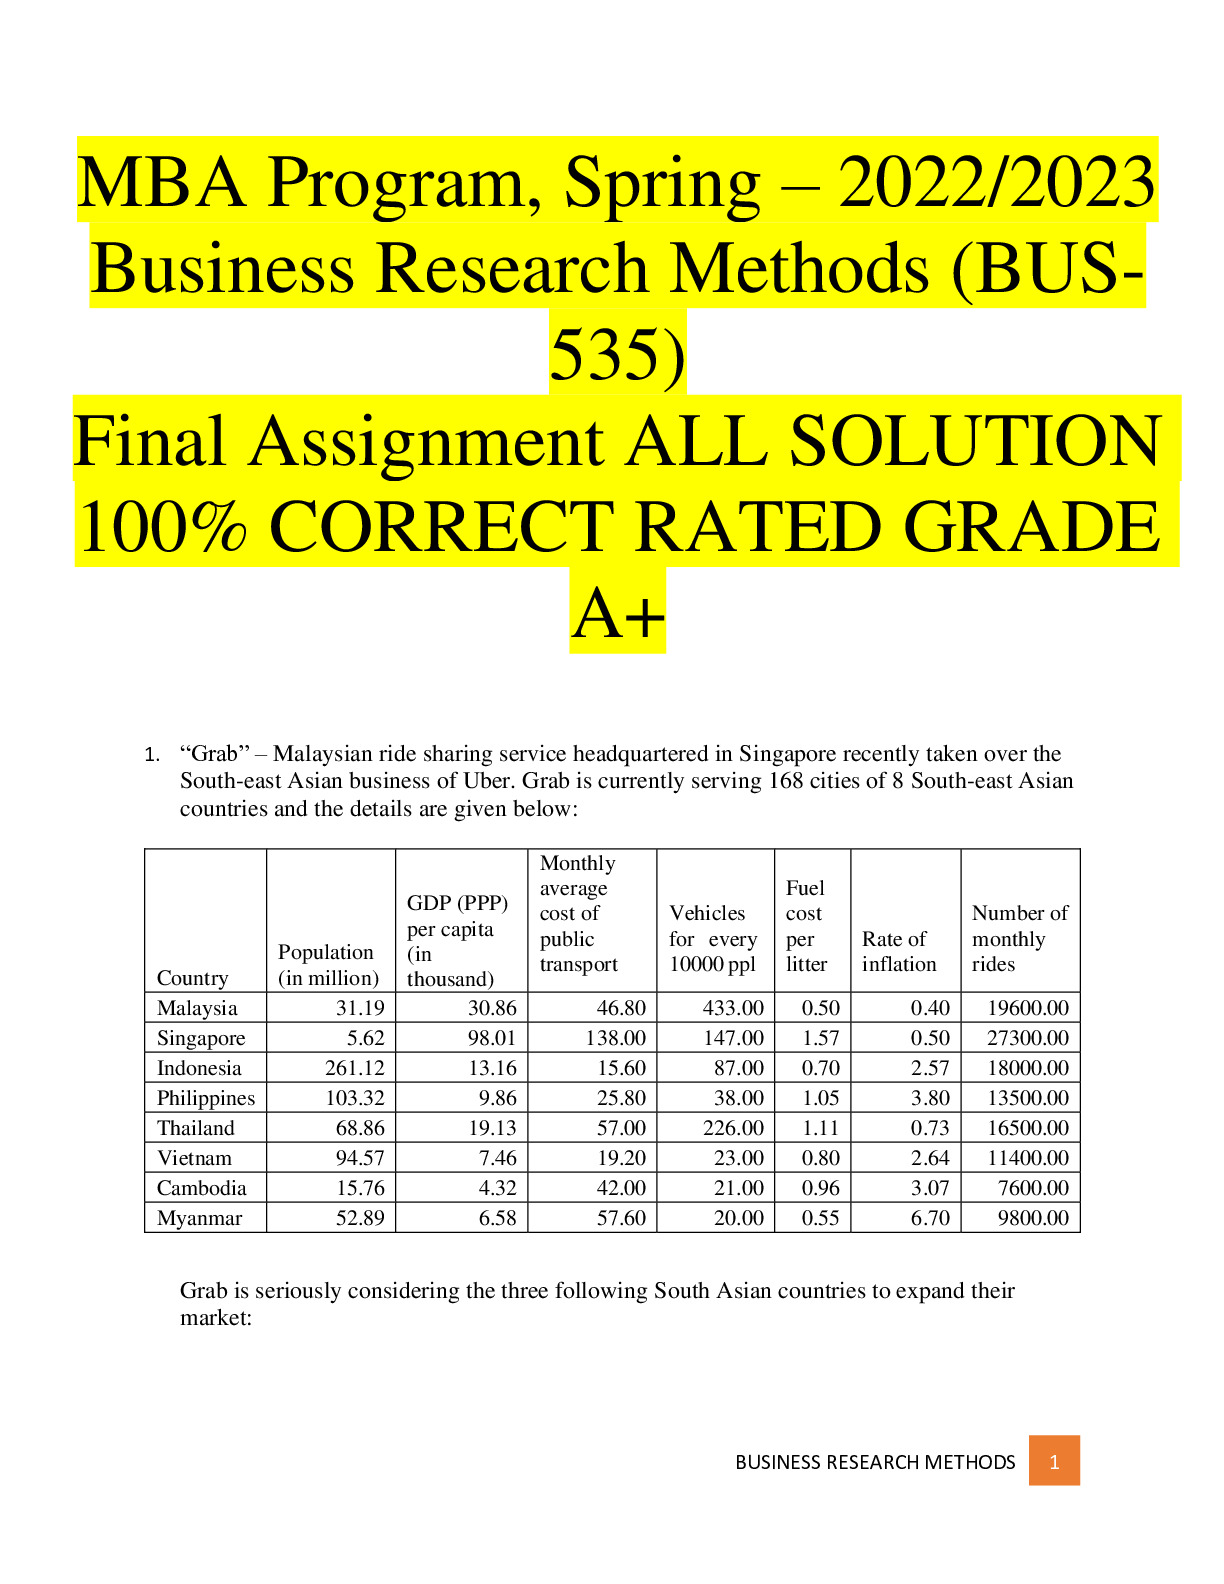 MBA Program, Spring - 2021Business Research Methods (BUS-535)Final Assignmen  Answer_2